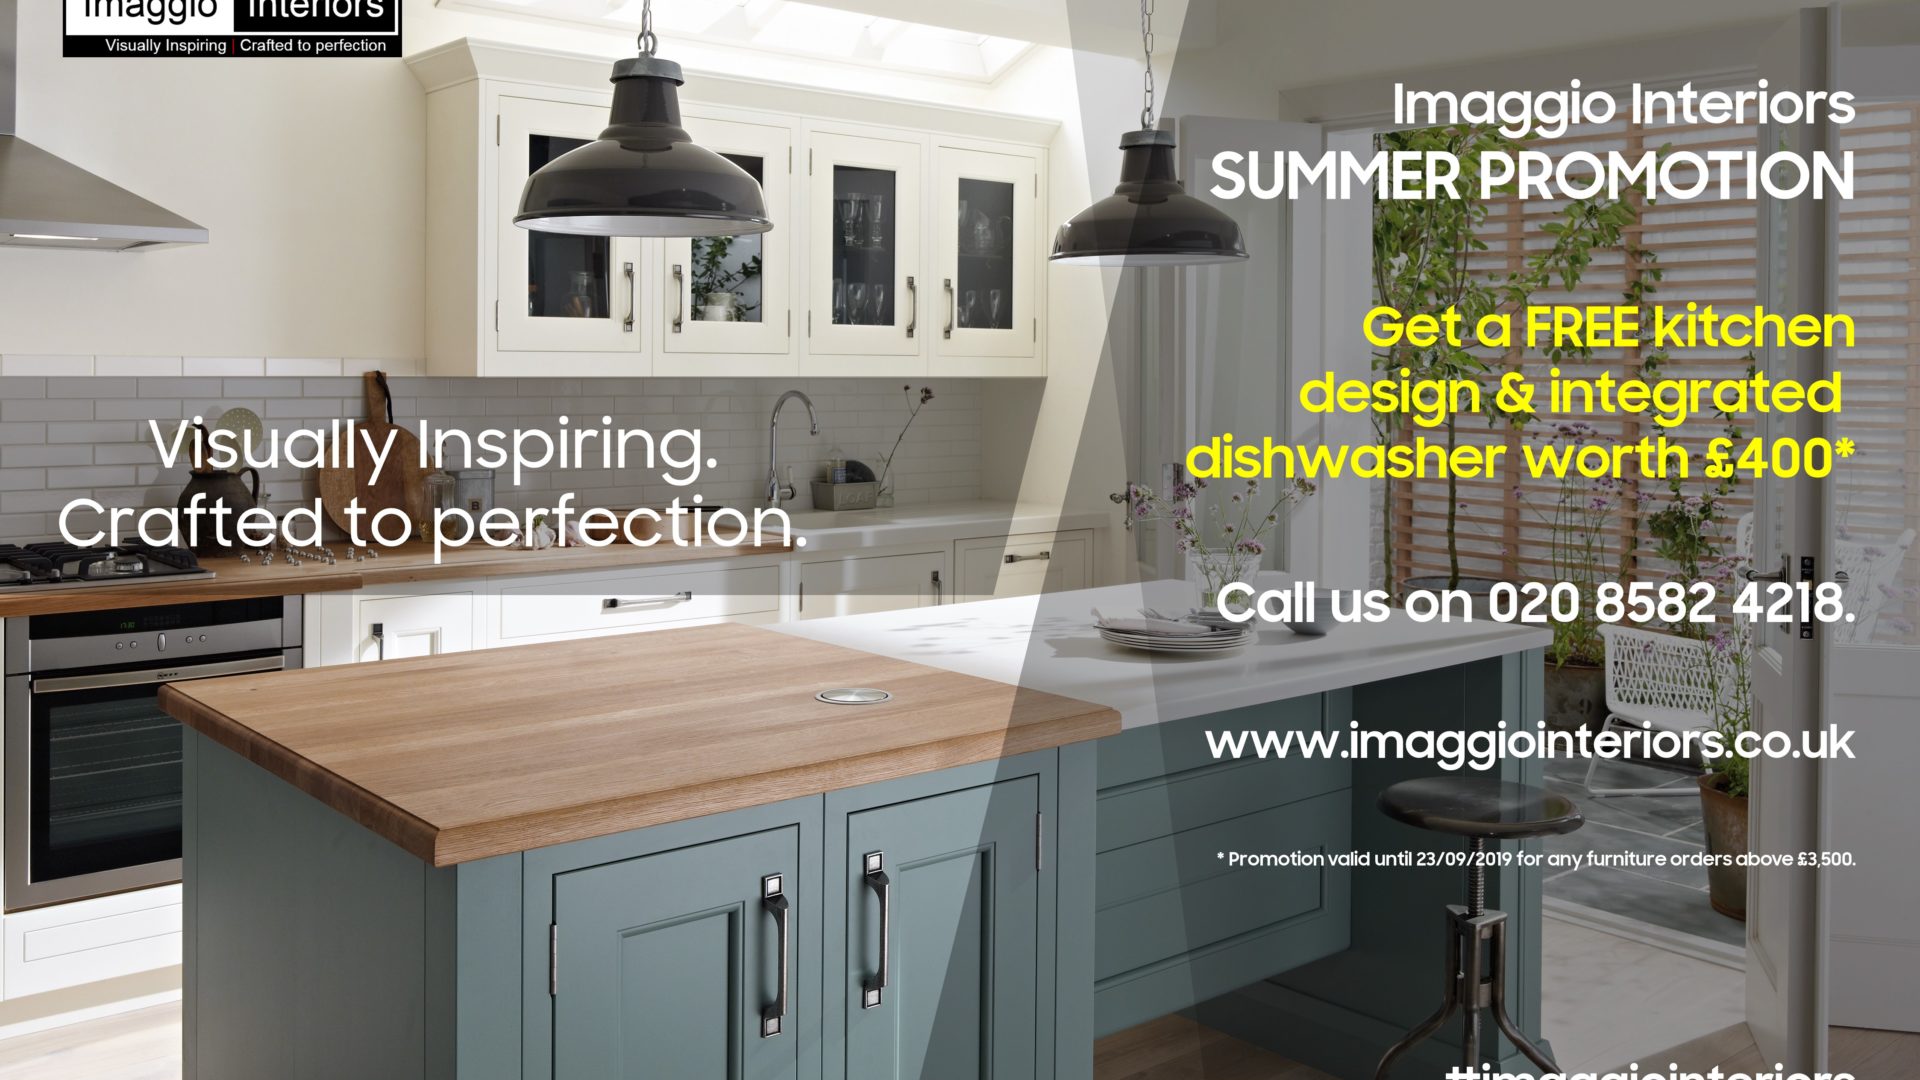 Imaggio Outside Promotion Poster A0 - Summer 2019